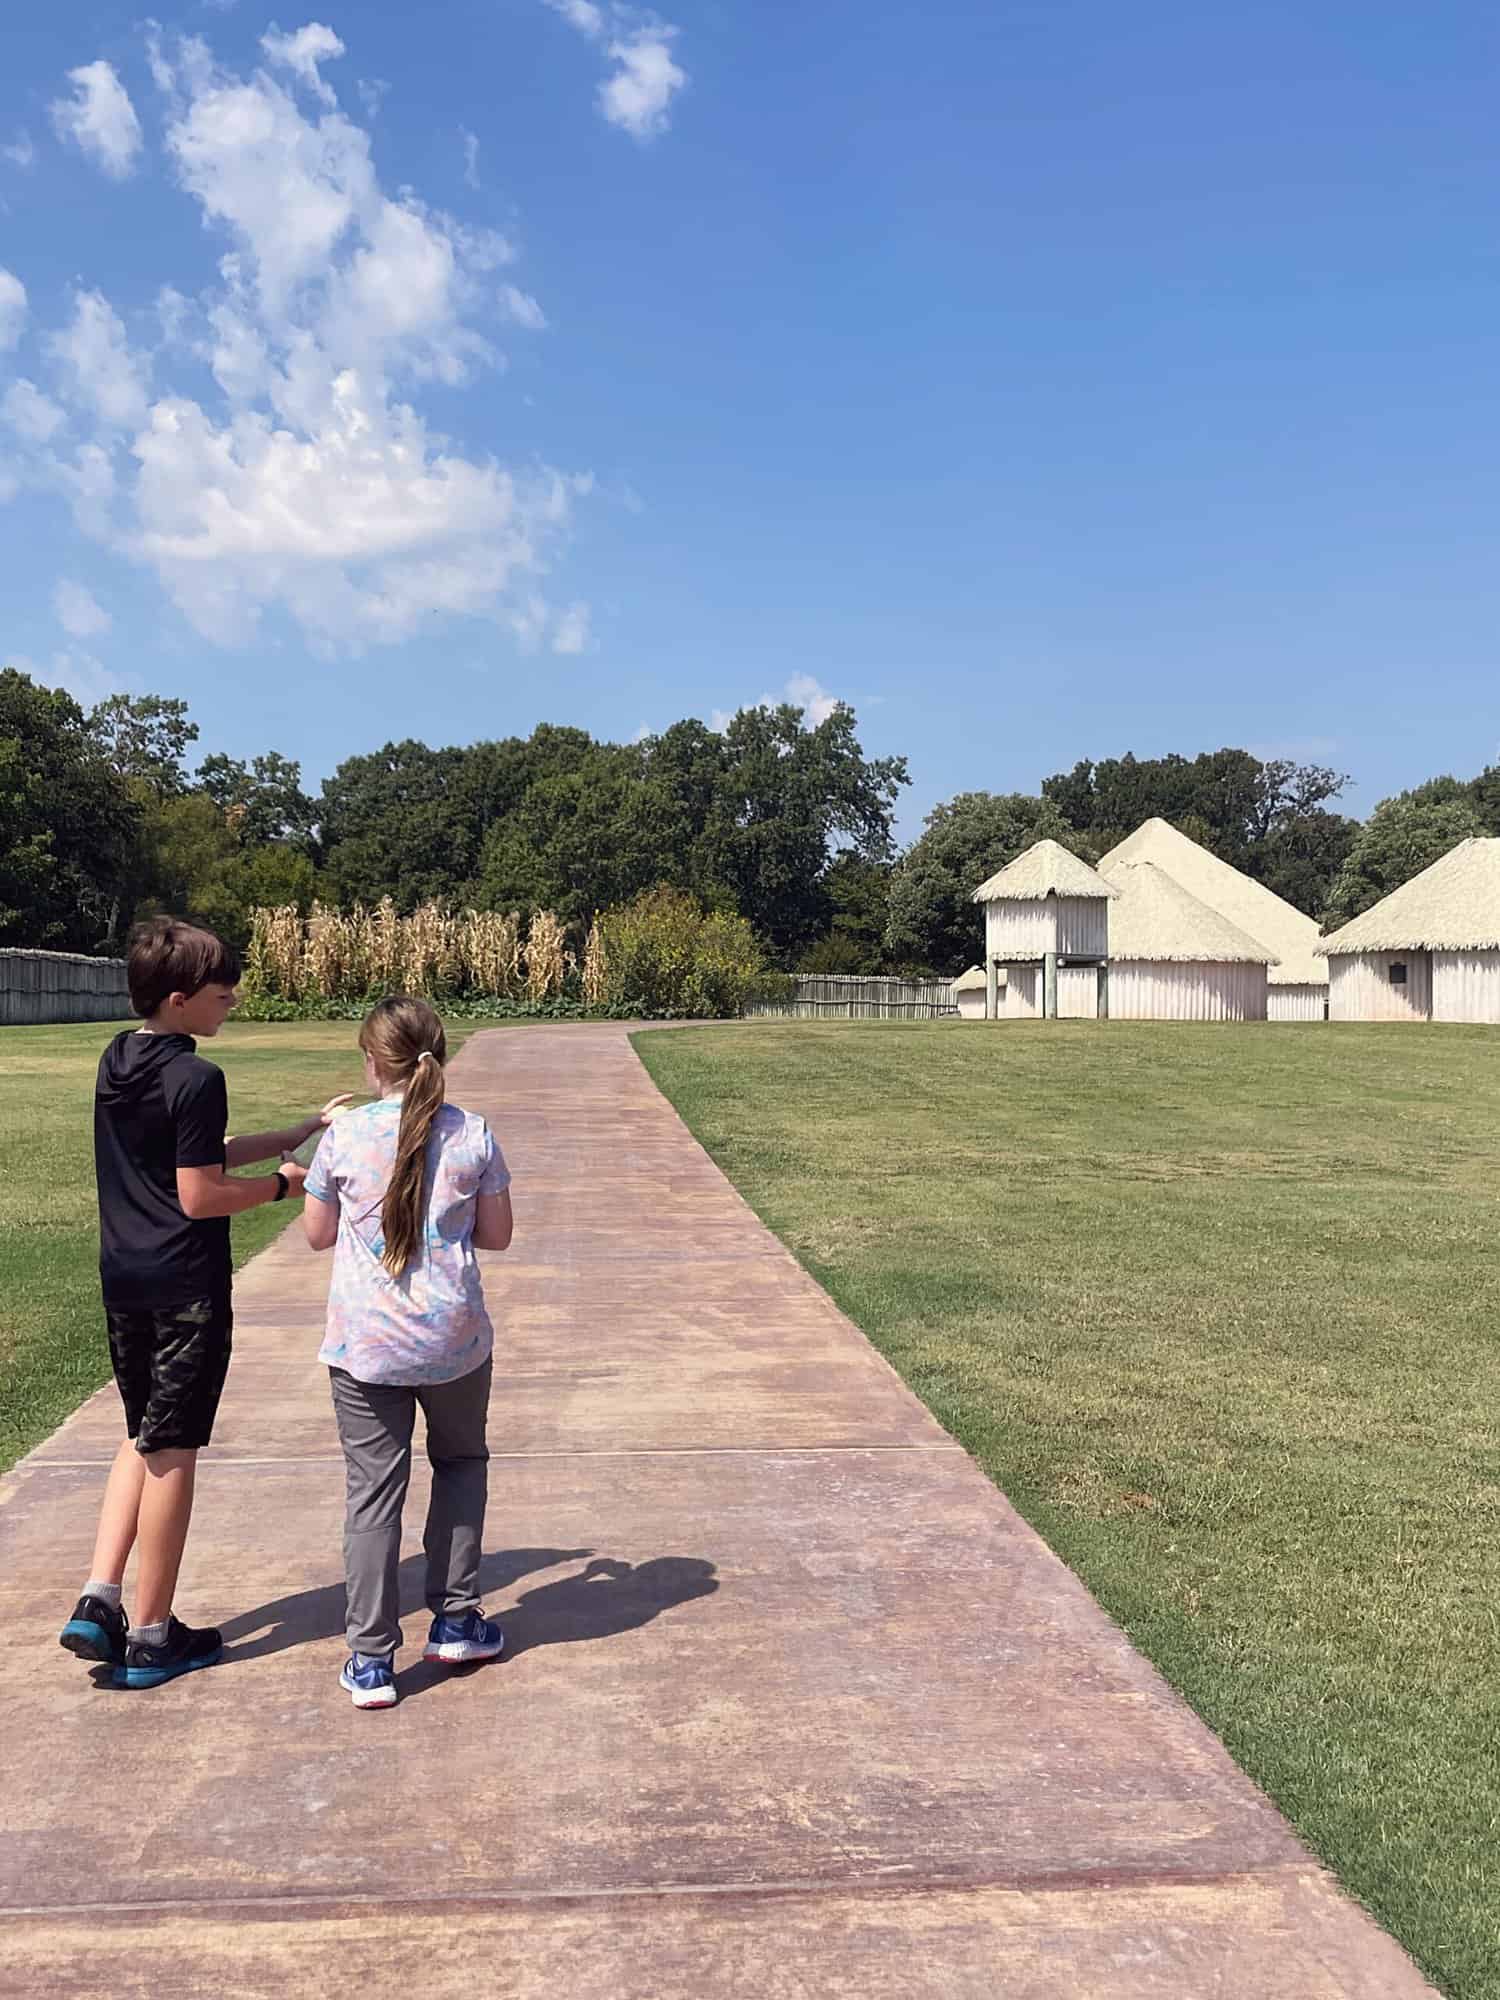 Chickasaw cultural center outdoor village with kids - learning about Native American history and Indian territory